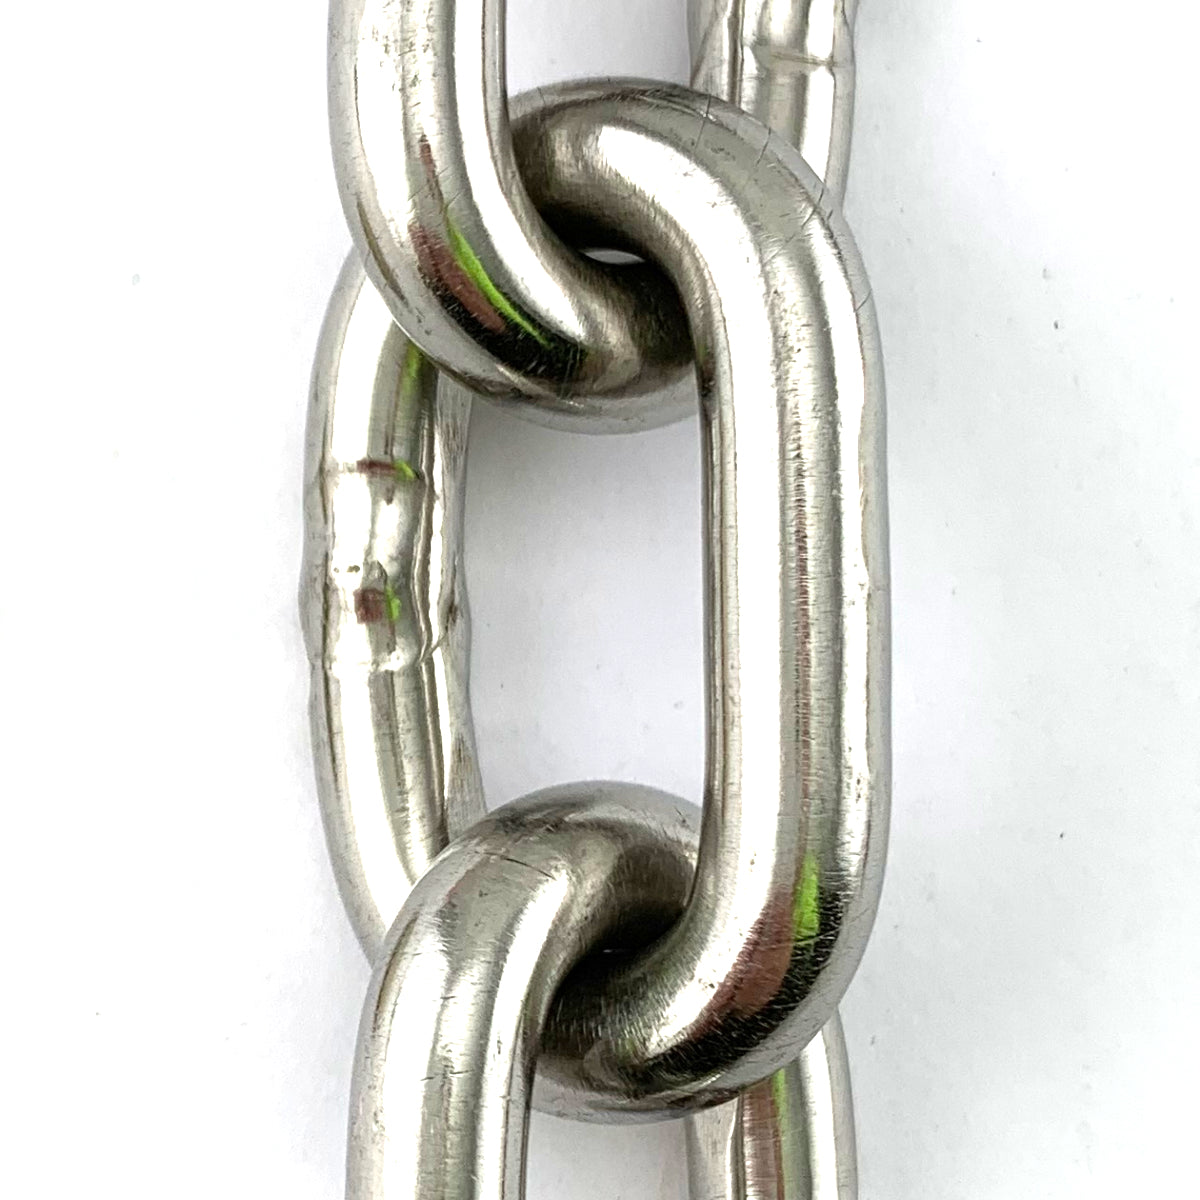 8mm stainless steel welded link chain. Order by the metre. Australia wide delivery.